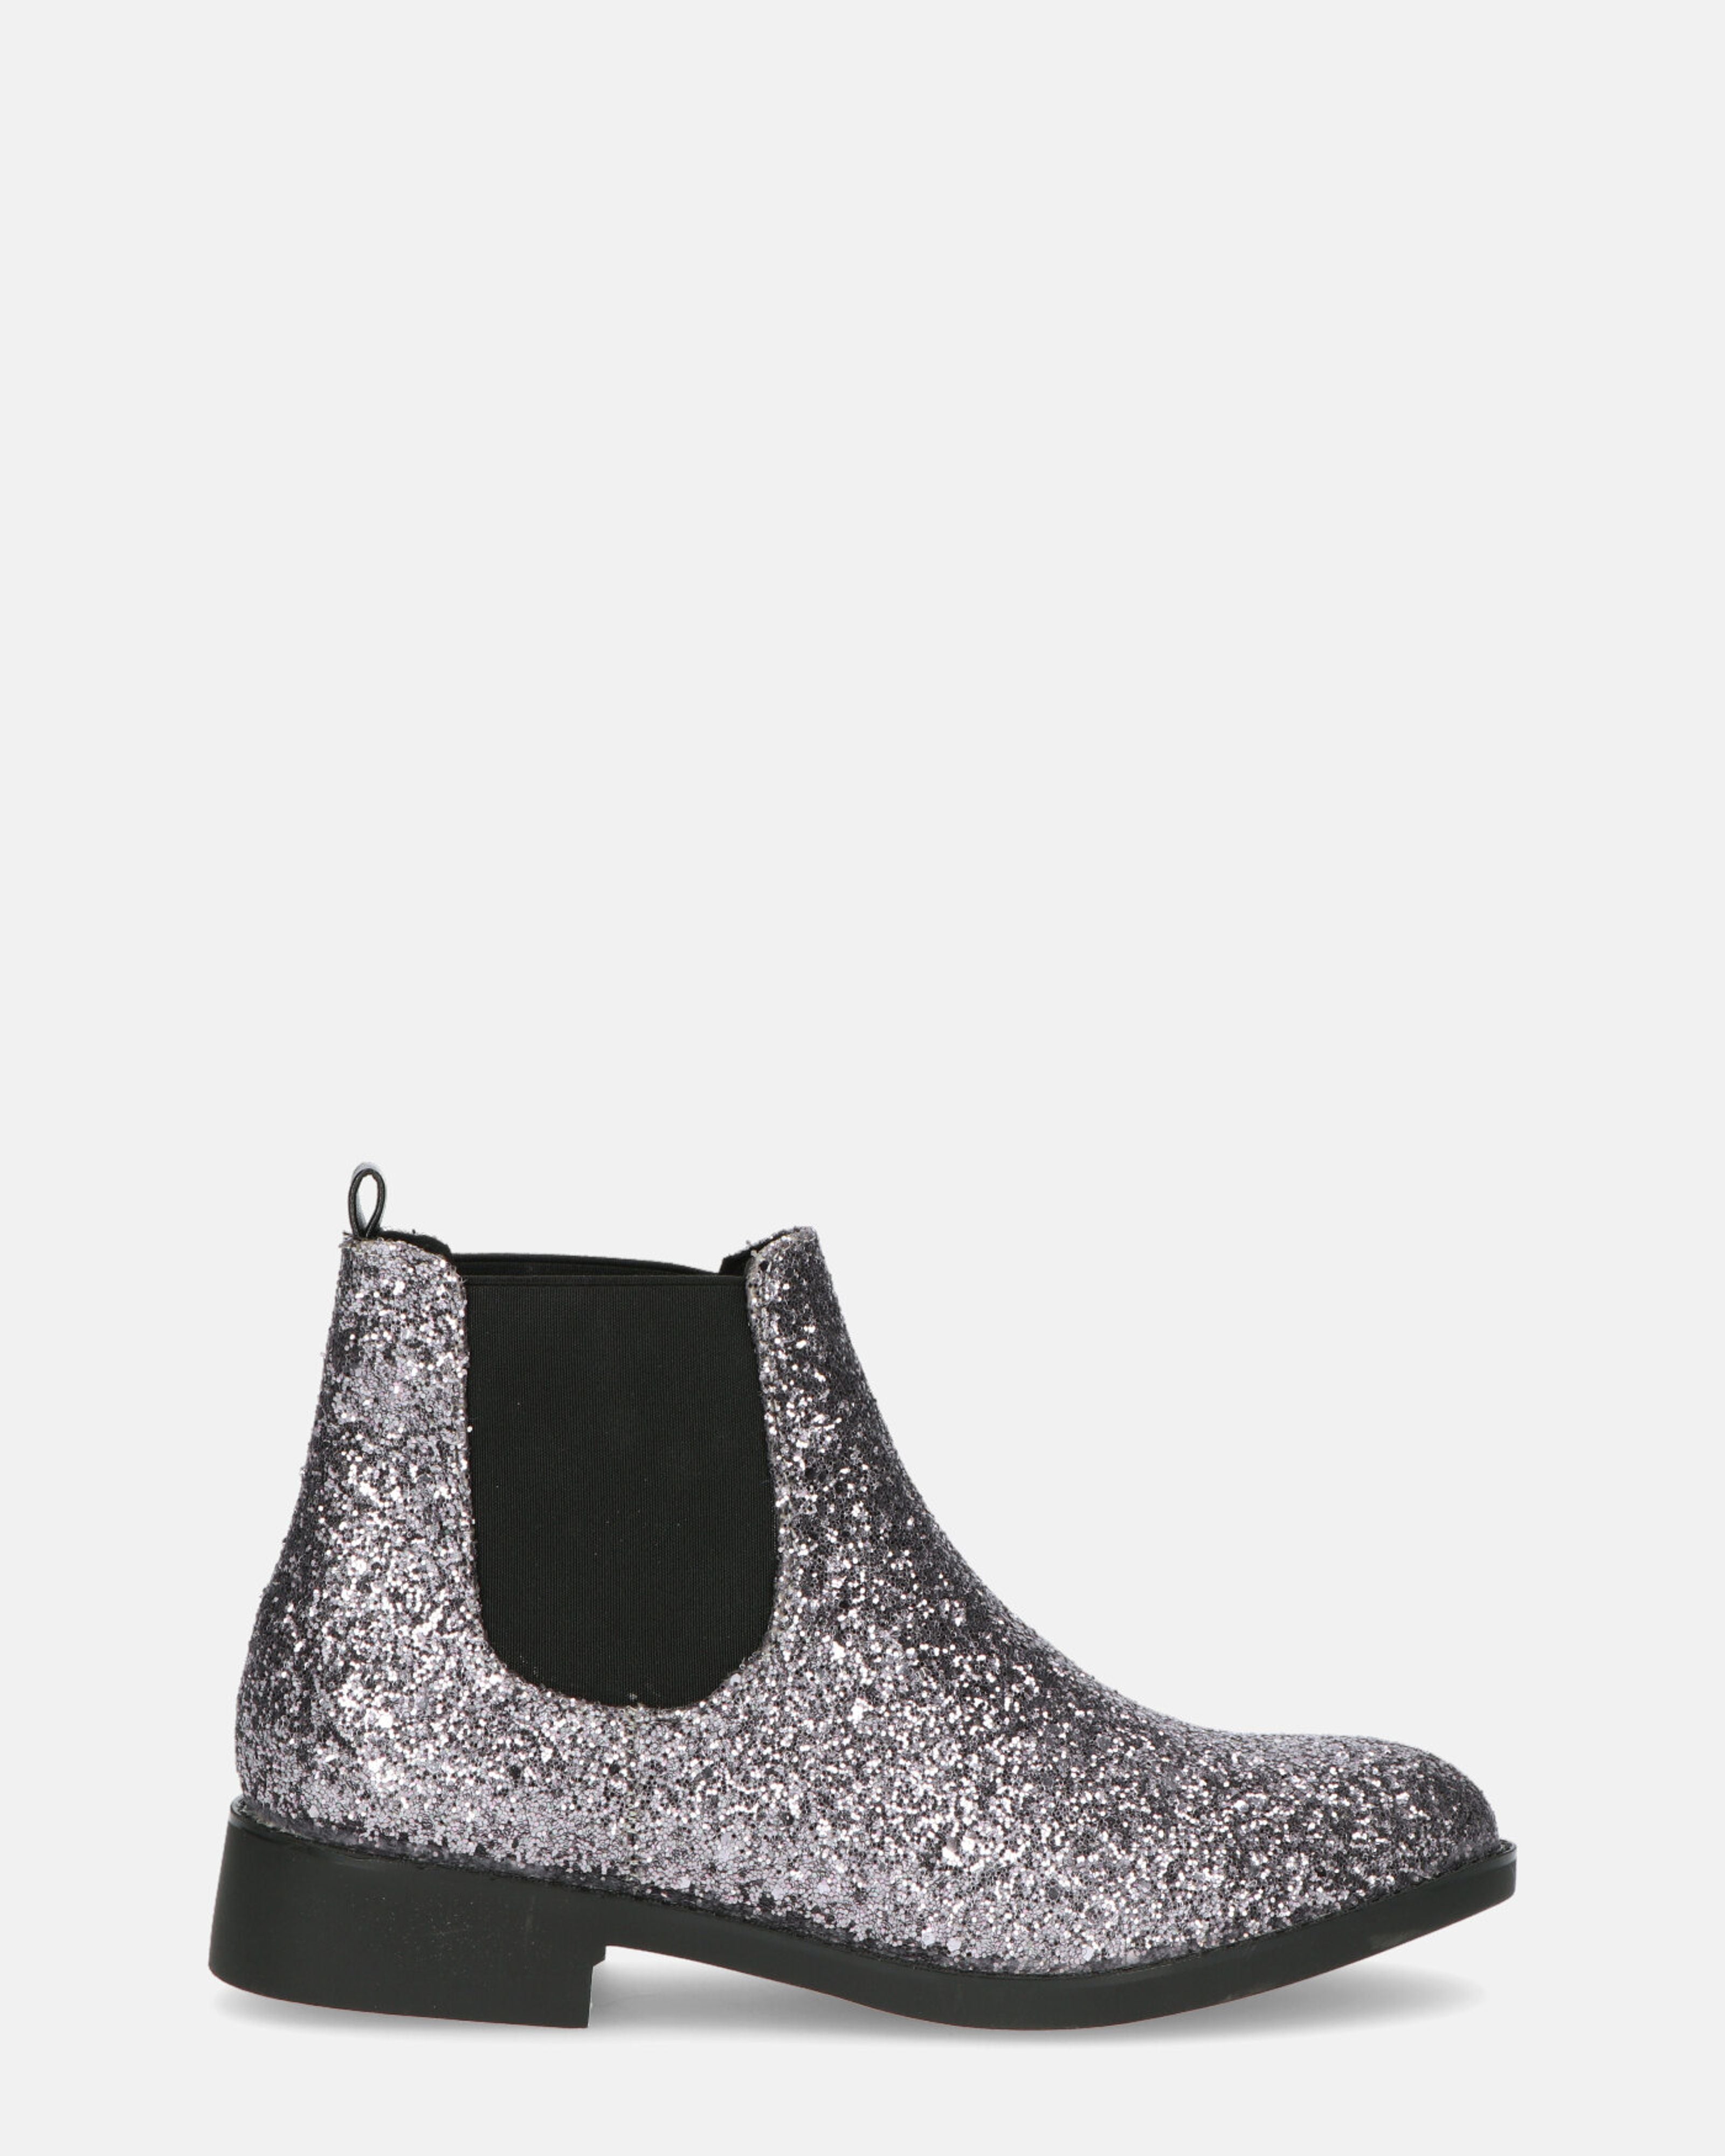  SOPHIE - chelsea style ankle boot in grey glitter